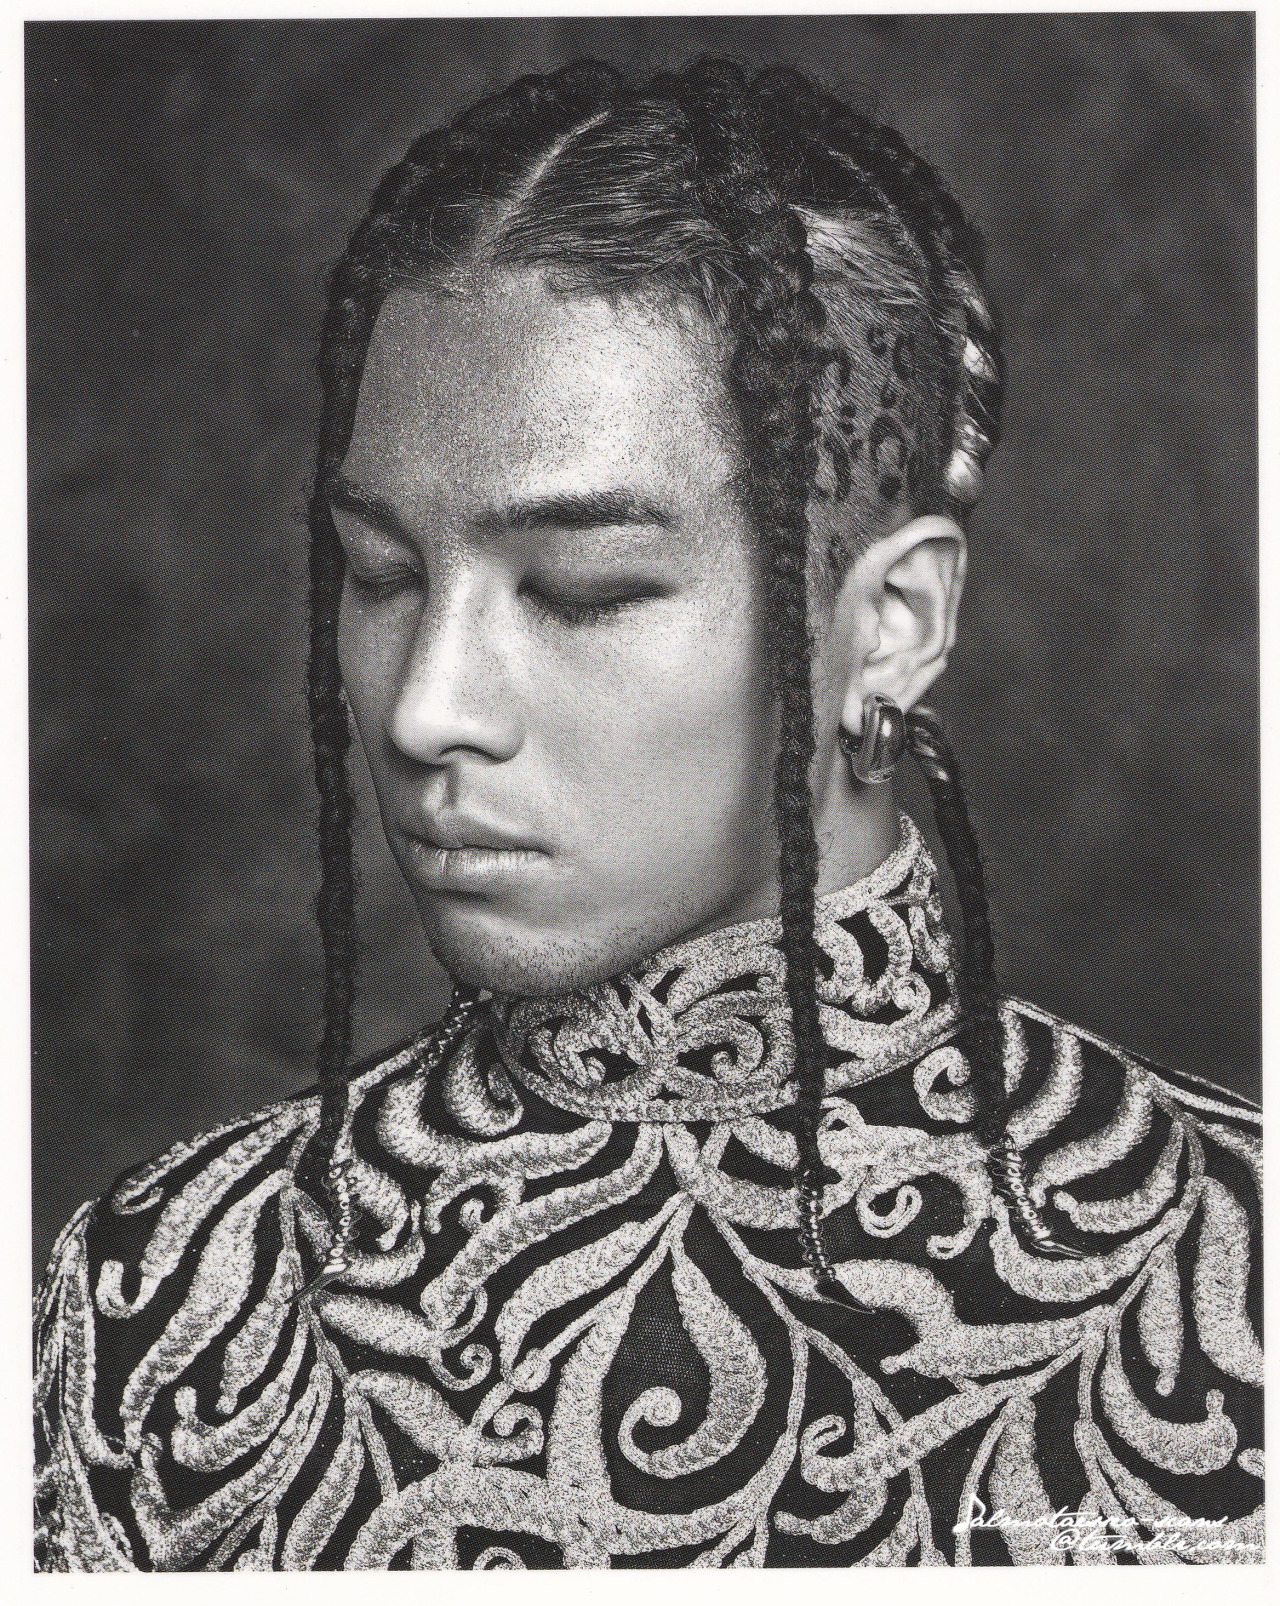 {HQ Scan} TaeYang’s RISE + best collection Vinyl LP photos -13- 
credit&#160;: jalmotaesseo-scans if editing! Do not repost without permission! Do not post to weheartit!